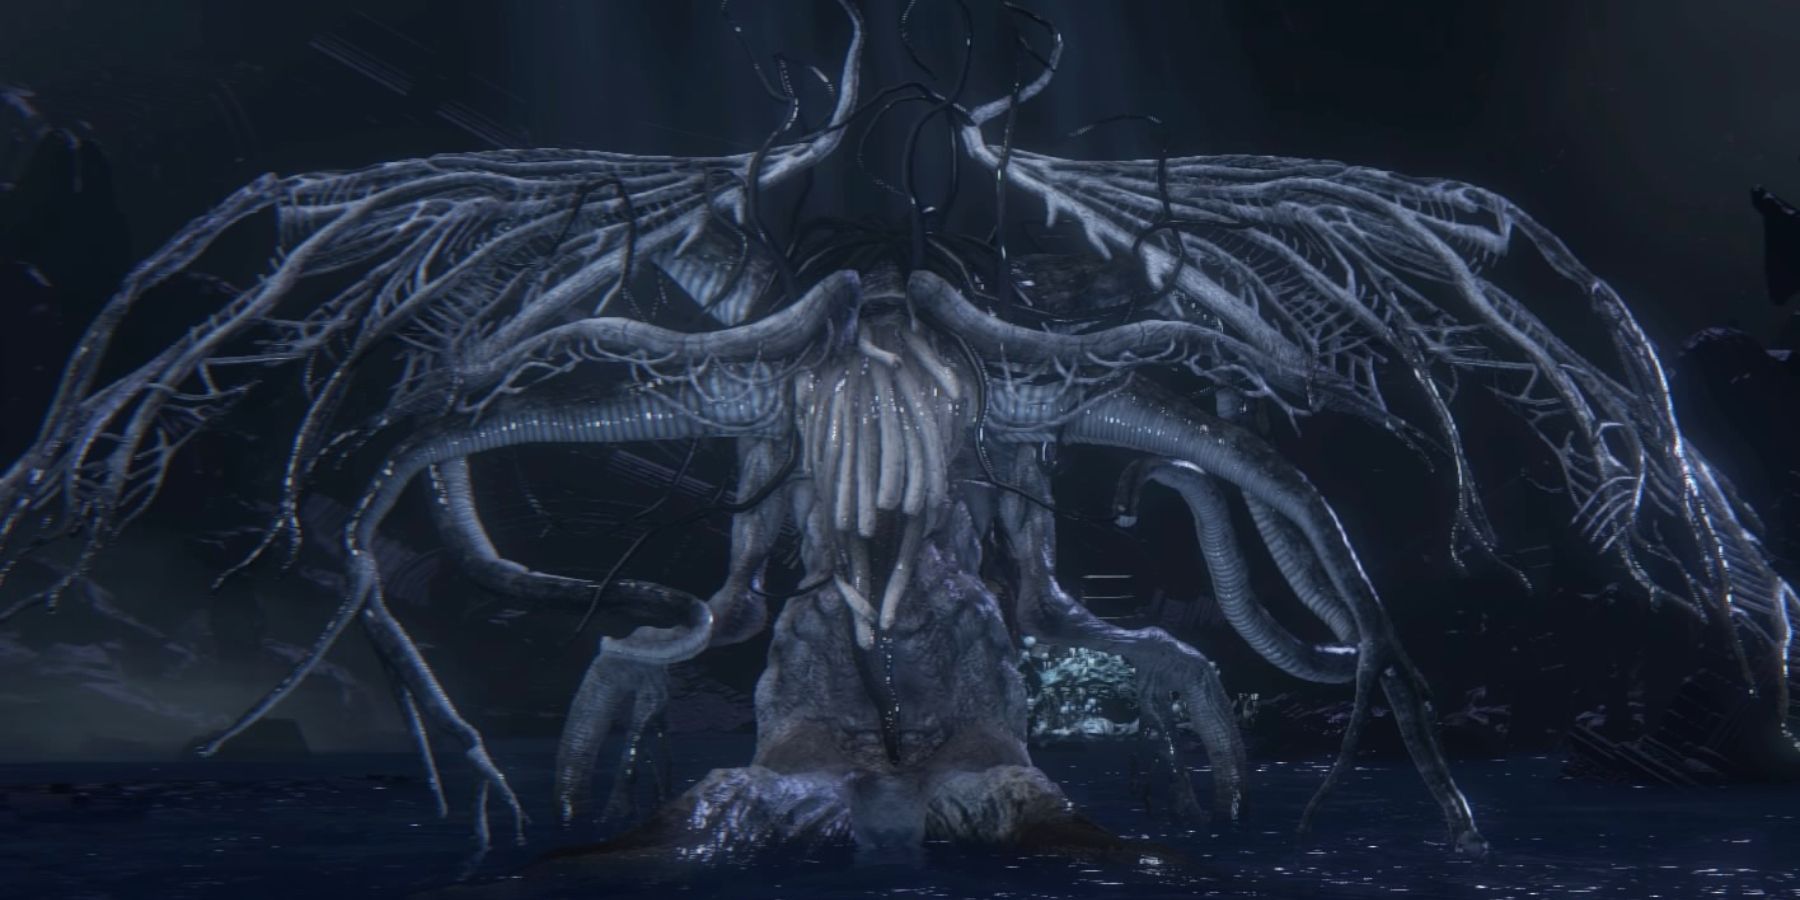 Ebrietas standing still before the start of the fight in Bloodborne.